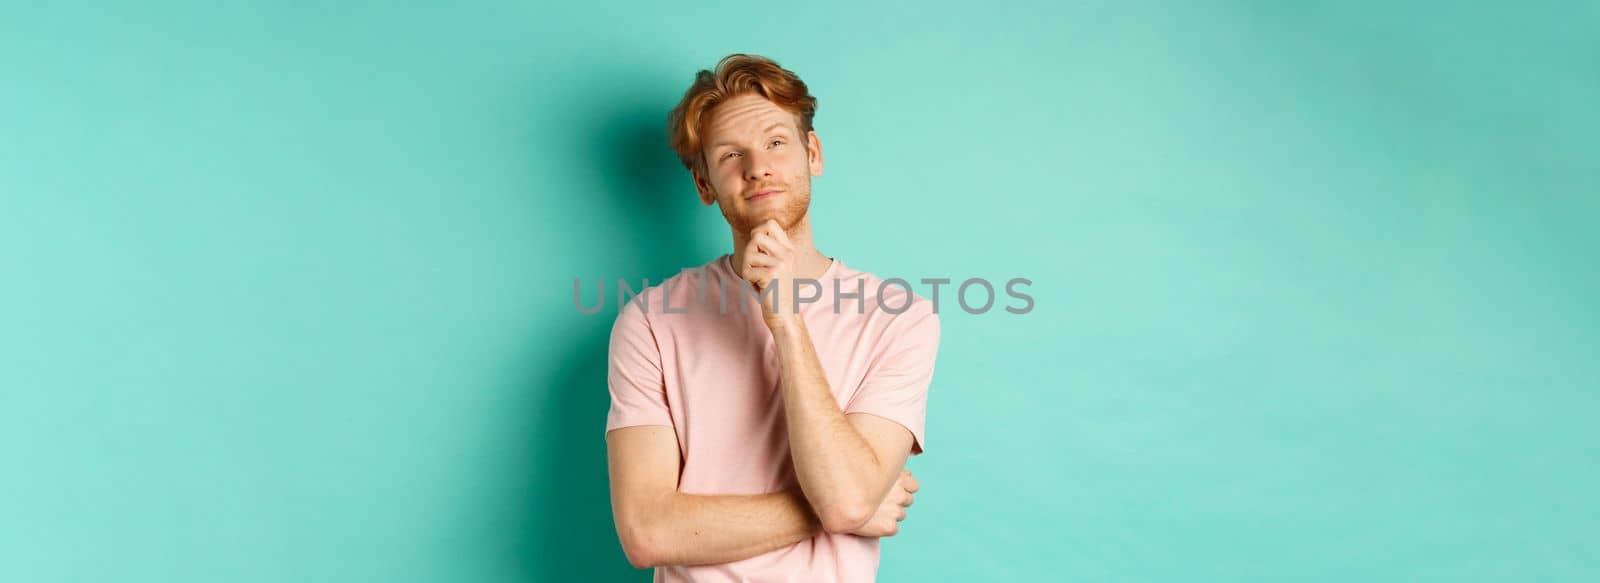 Pensive handsome man with red hair and beard looking at upper left corner, making choice and looking thoughtful, standing in t-shirt over mint background.